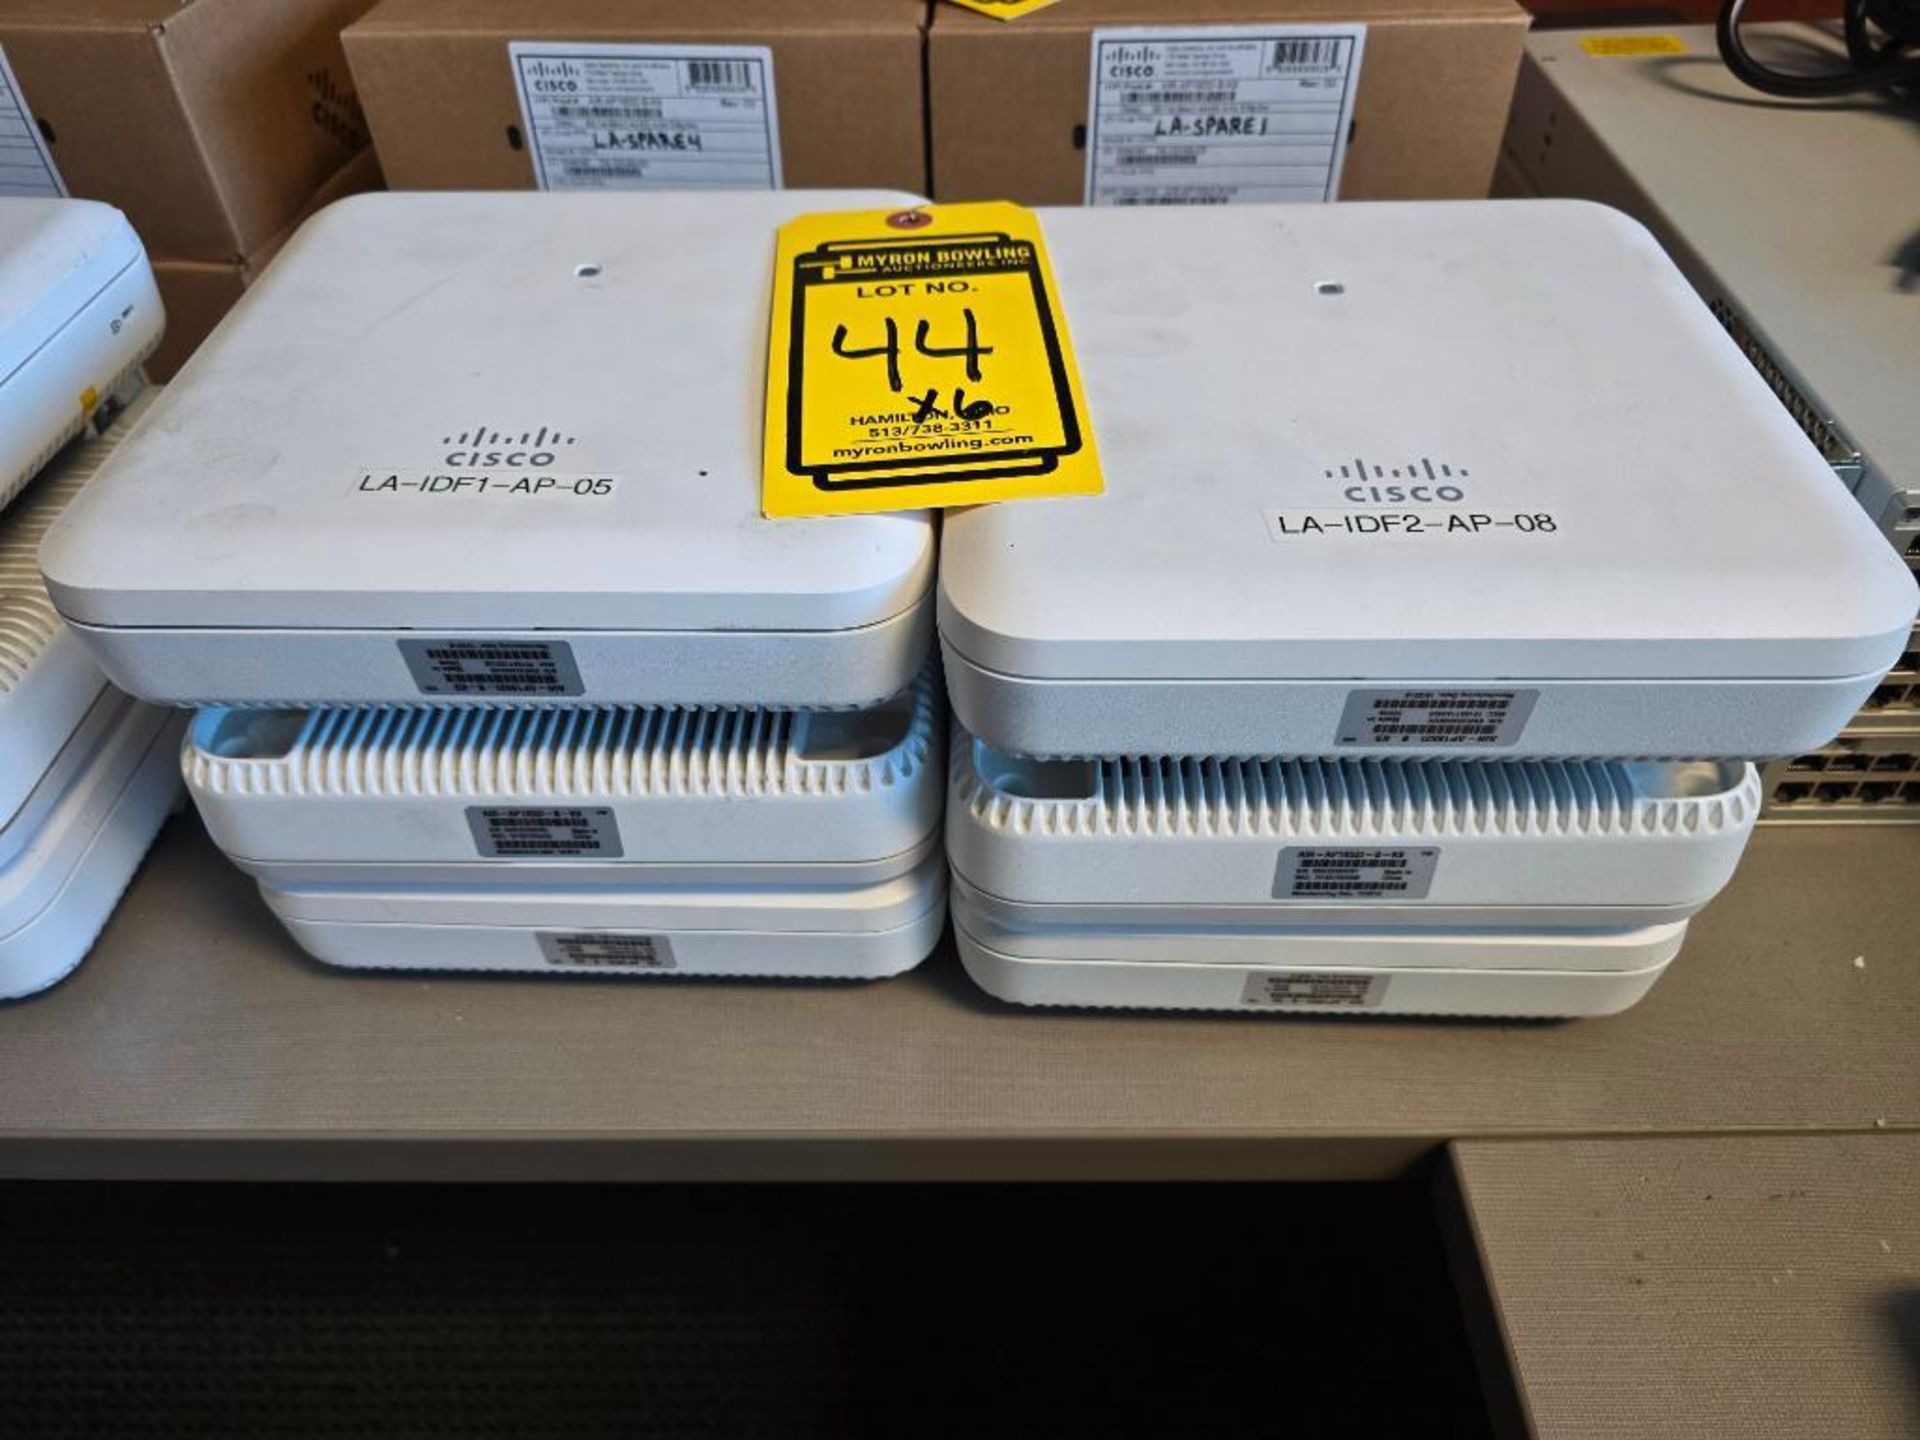 (6) Cisco Air-AP1852 Wireless Access Points ($10 Loading Fee Will Be Added To Buyer's Invoice)